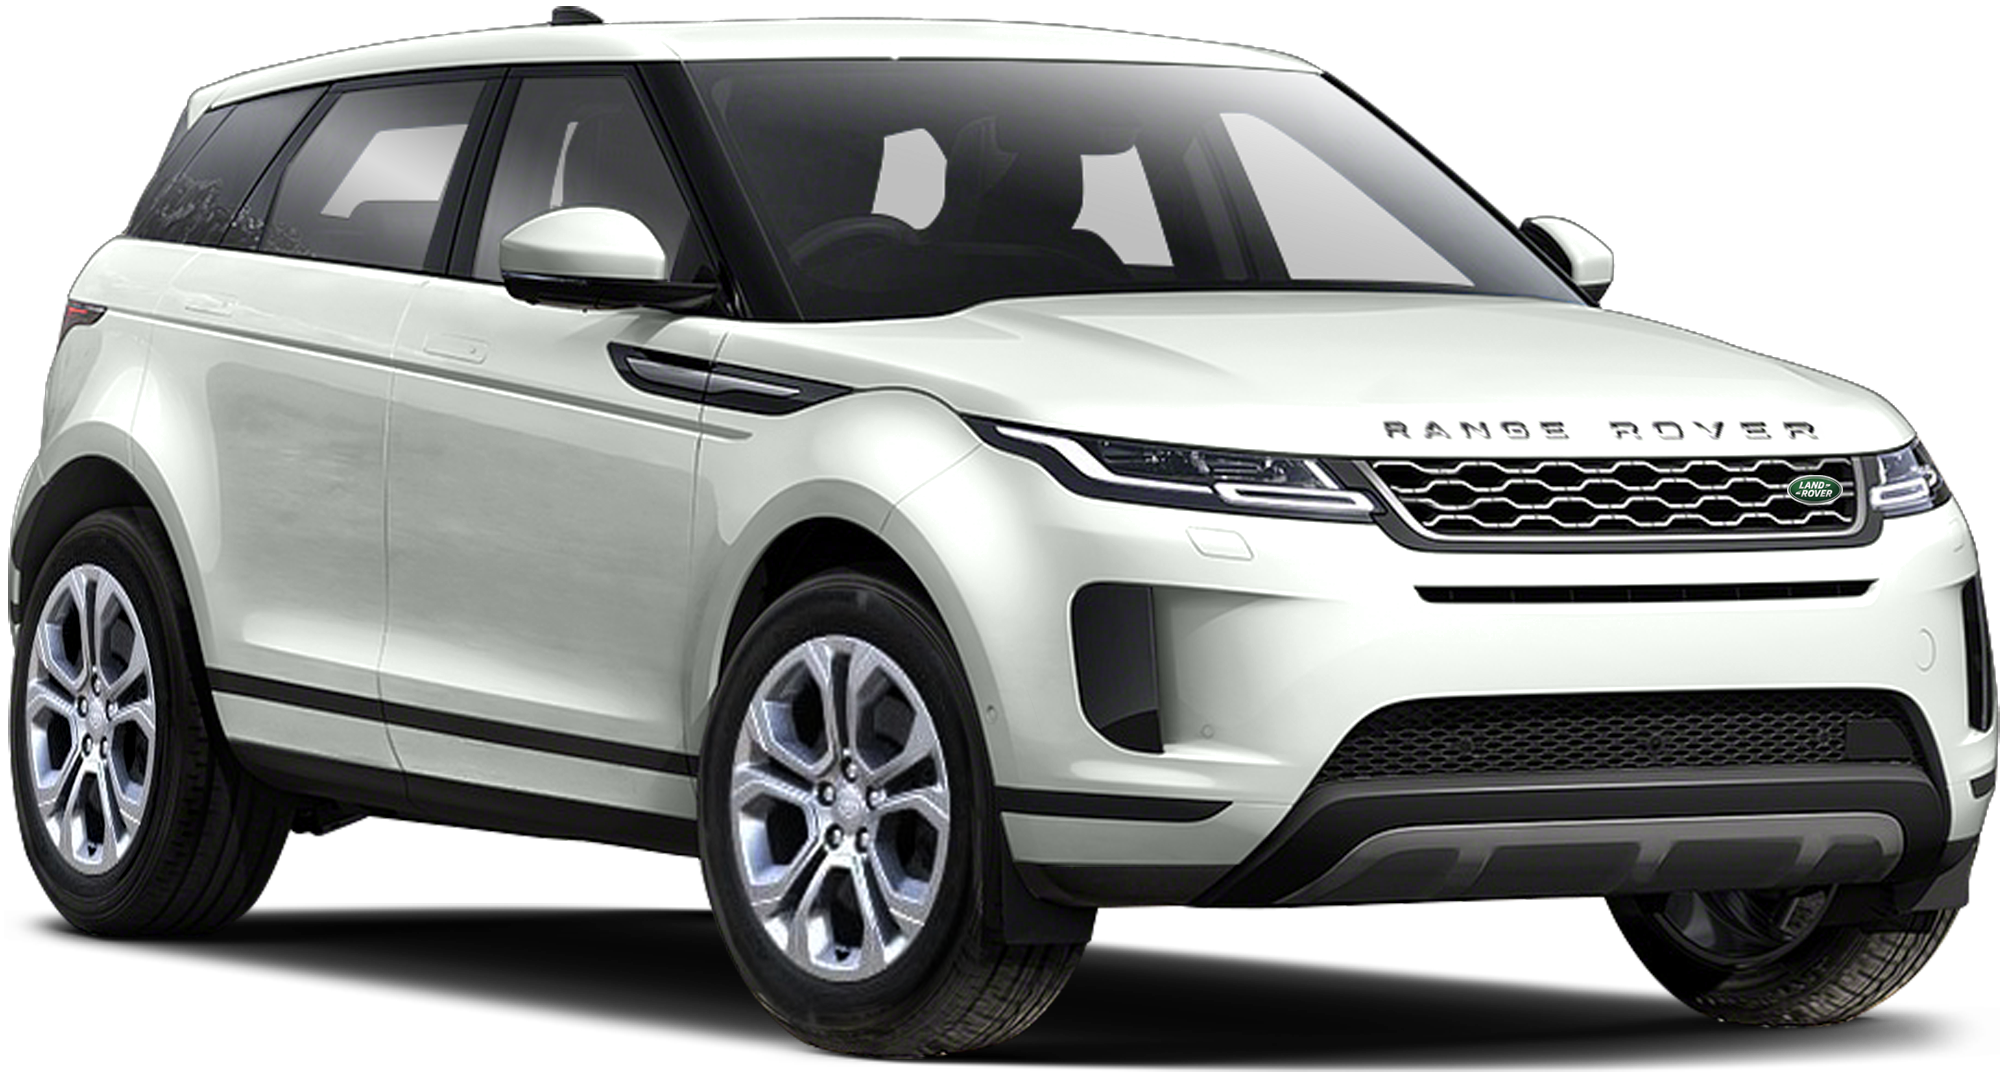 2020 Land Rover Range Rover Evoque Incentives, Specials & Offers in Wexford  PA